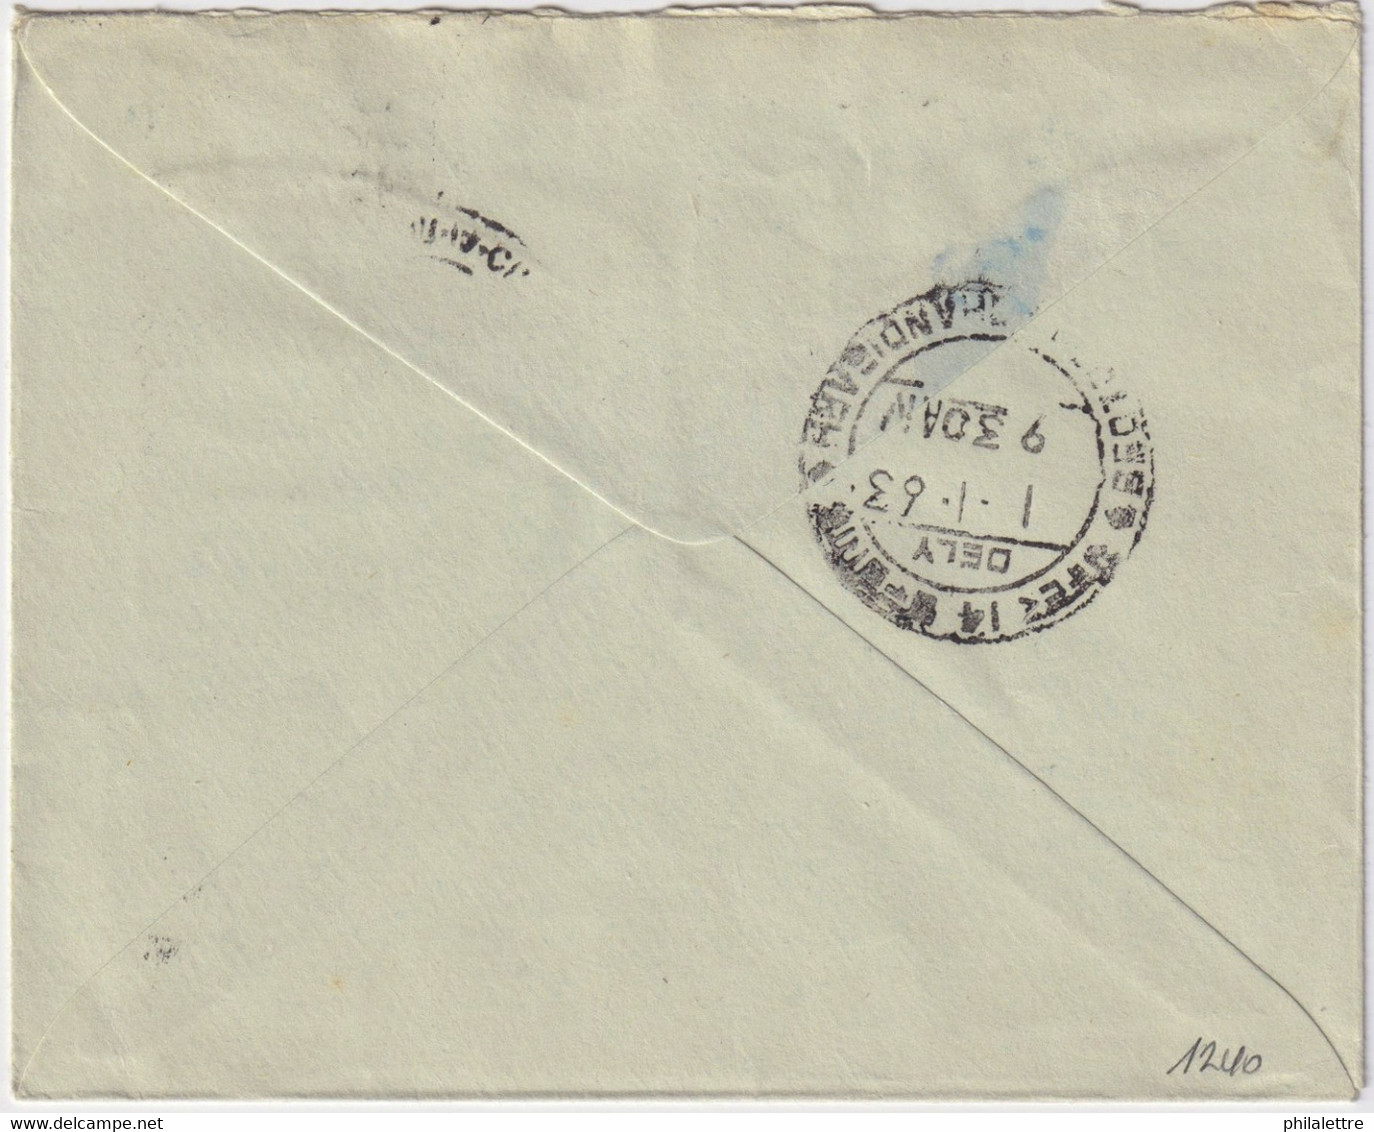 INDE / INDIA - 1962 - Fine Postal Envelope Used Locally In CHANDIGARH - Buste